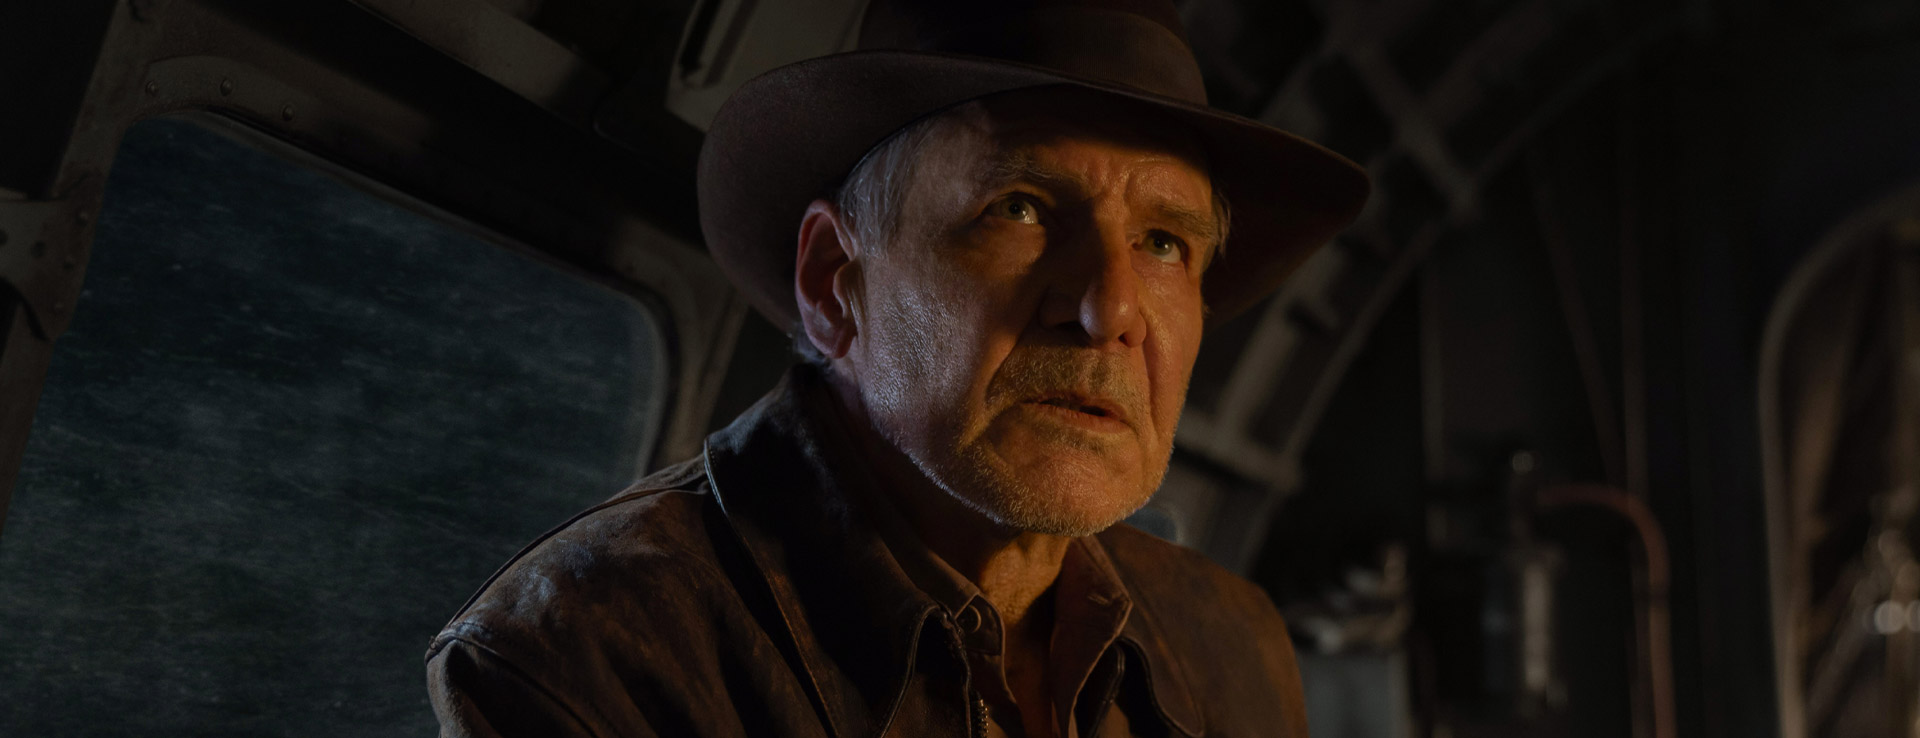 All Four Indiana Jones Films Coming Soon To 4K Ultra HD – What's On Disney  Plus